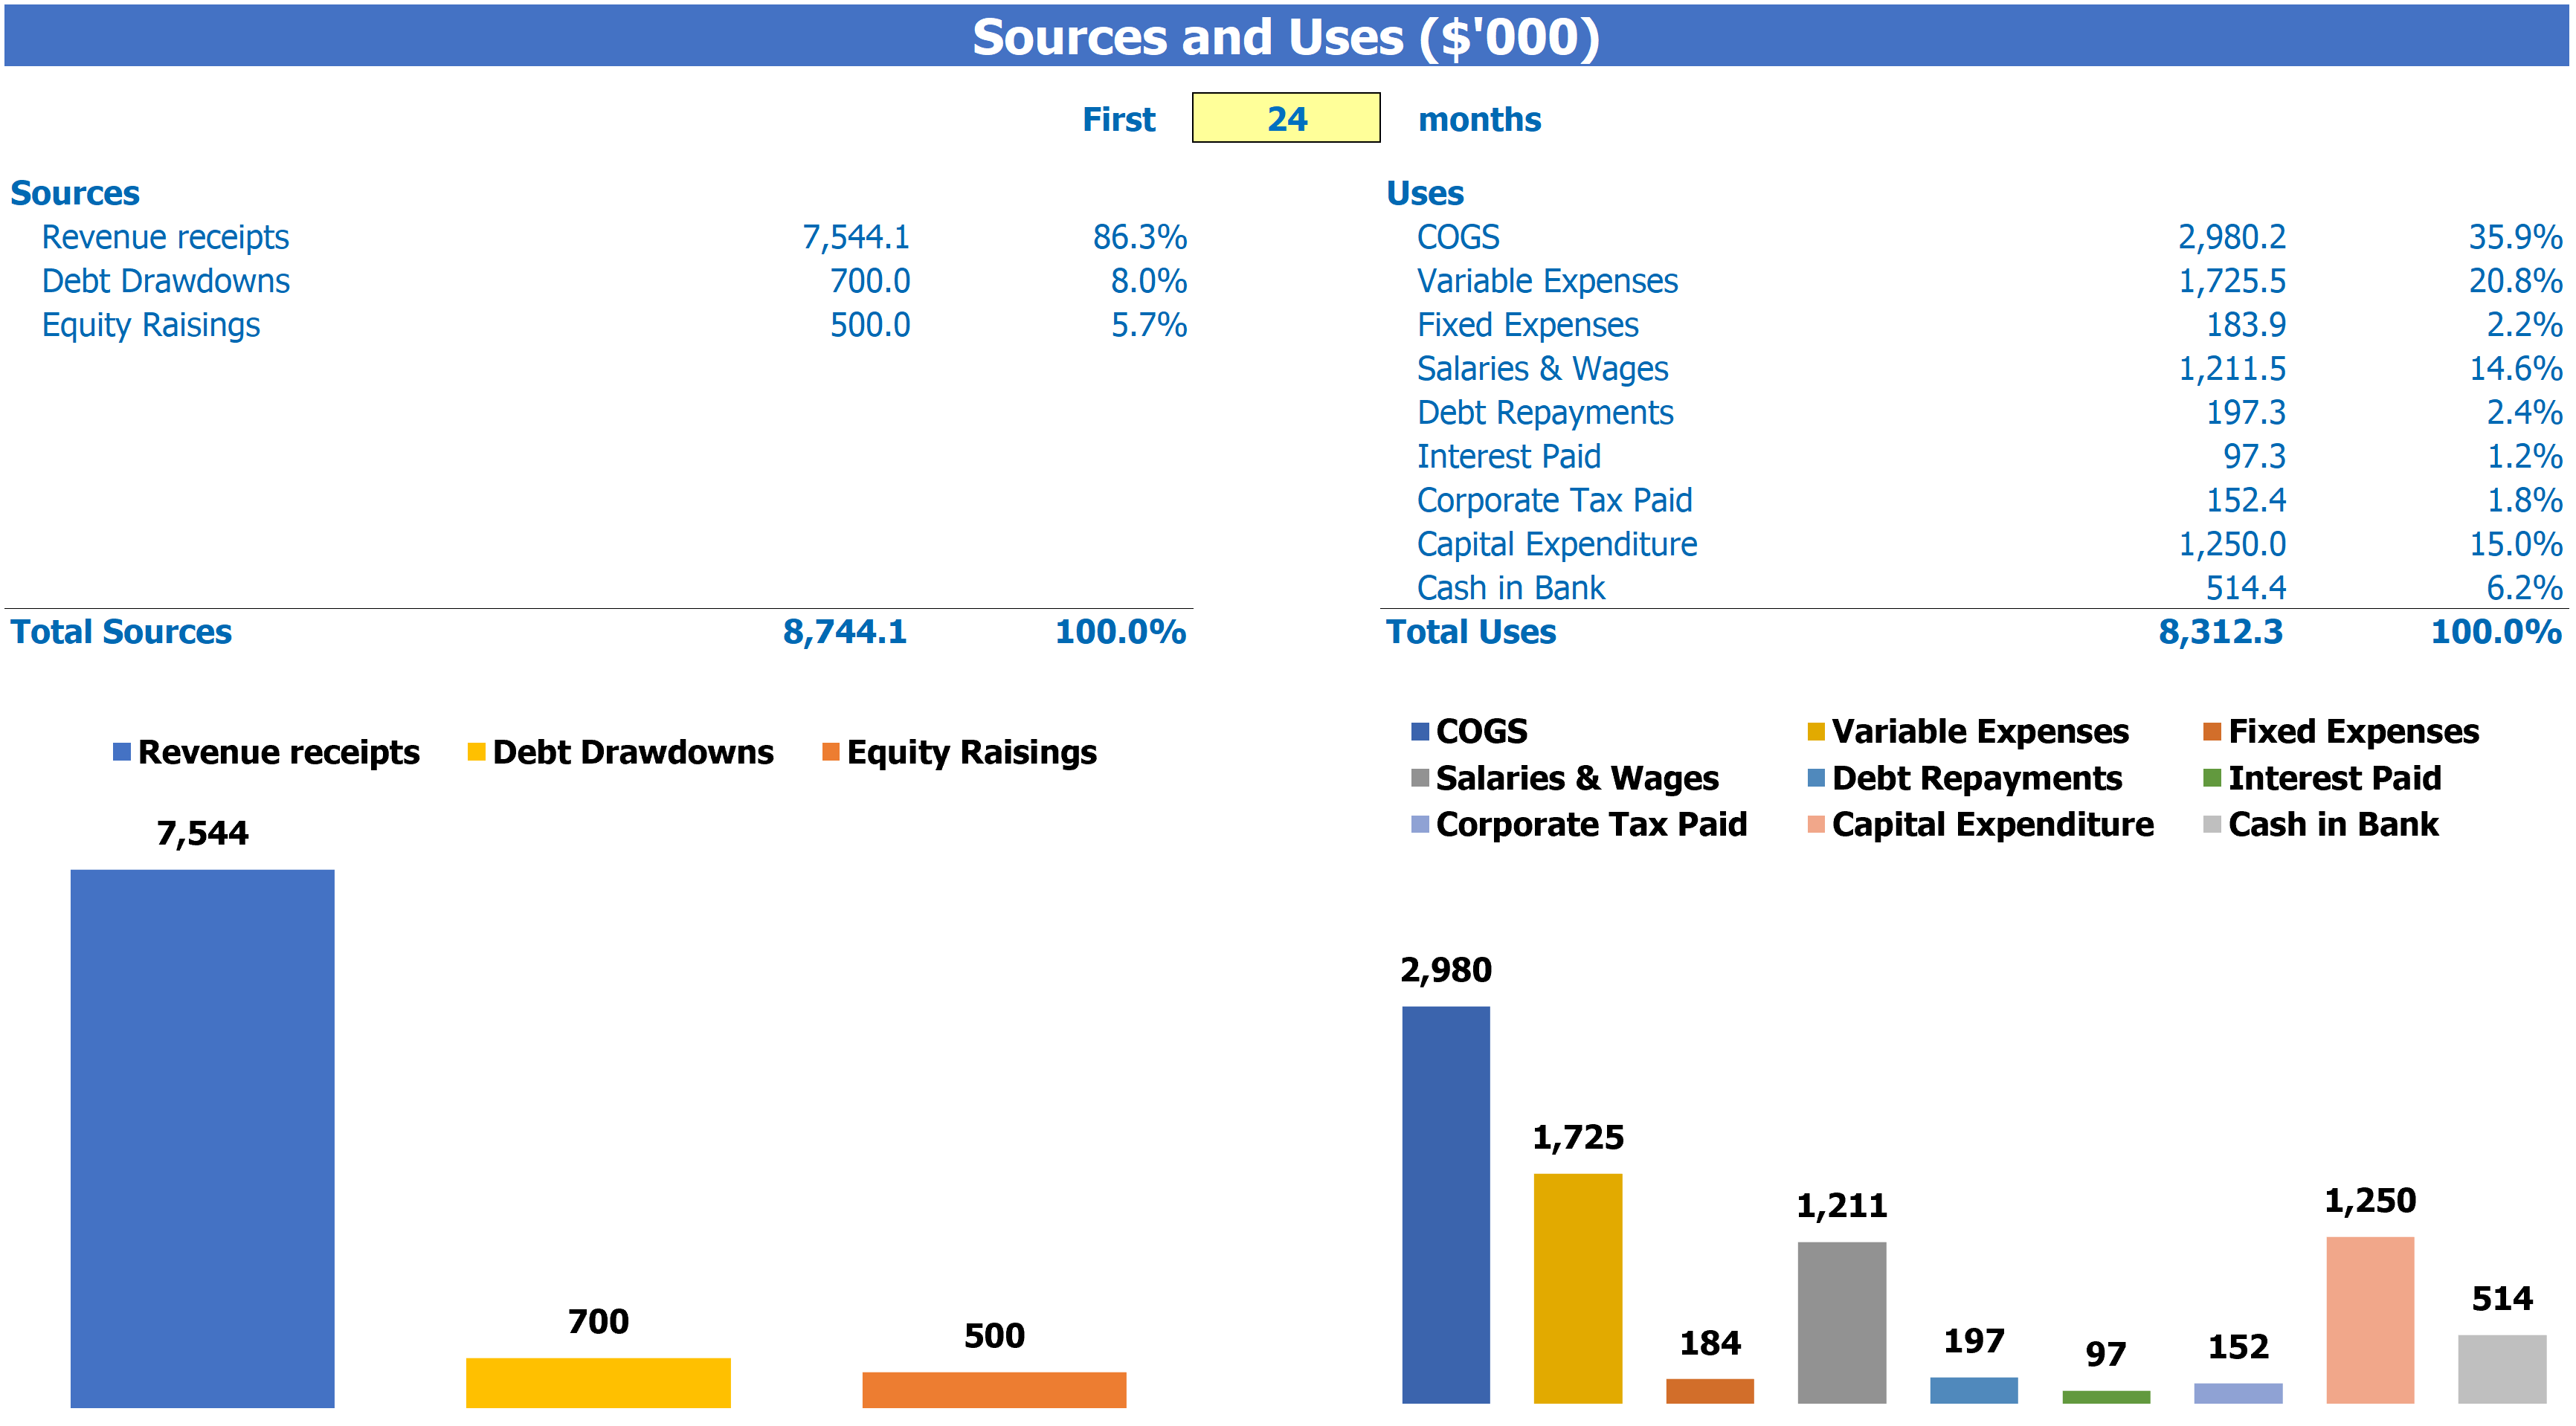 Pizza Financial Plan Sources And Uses Report